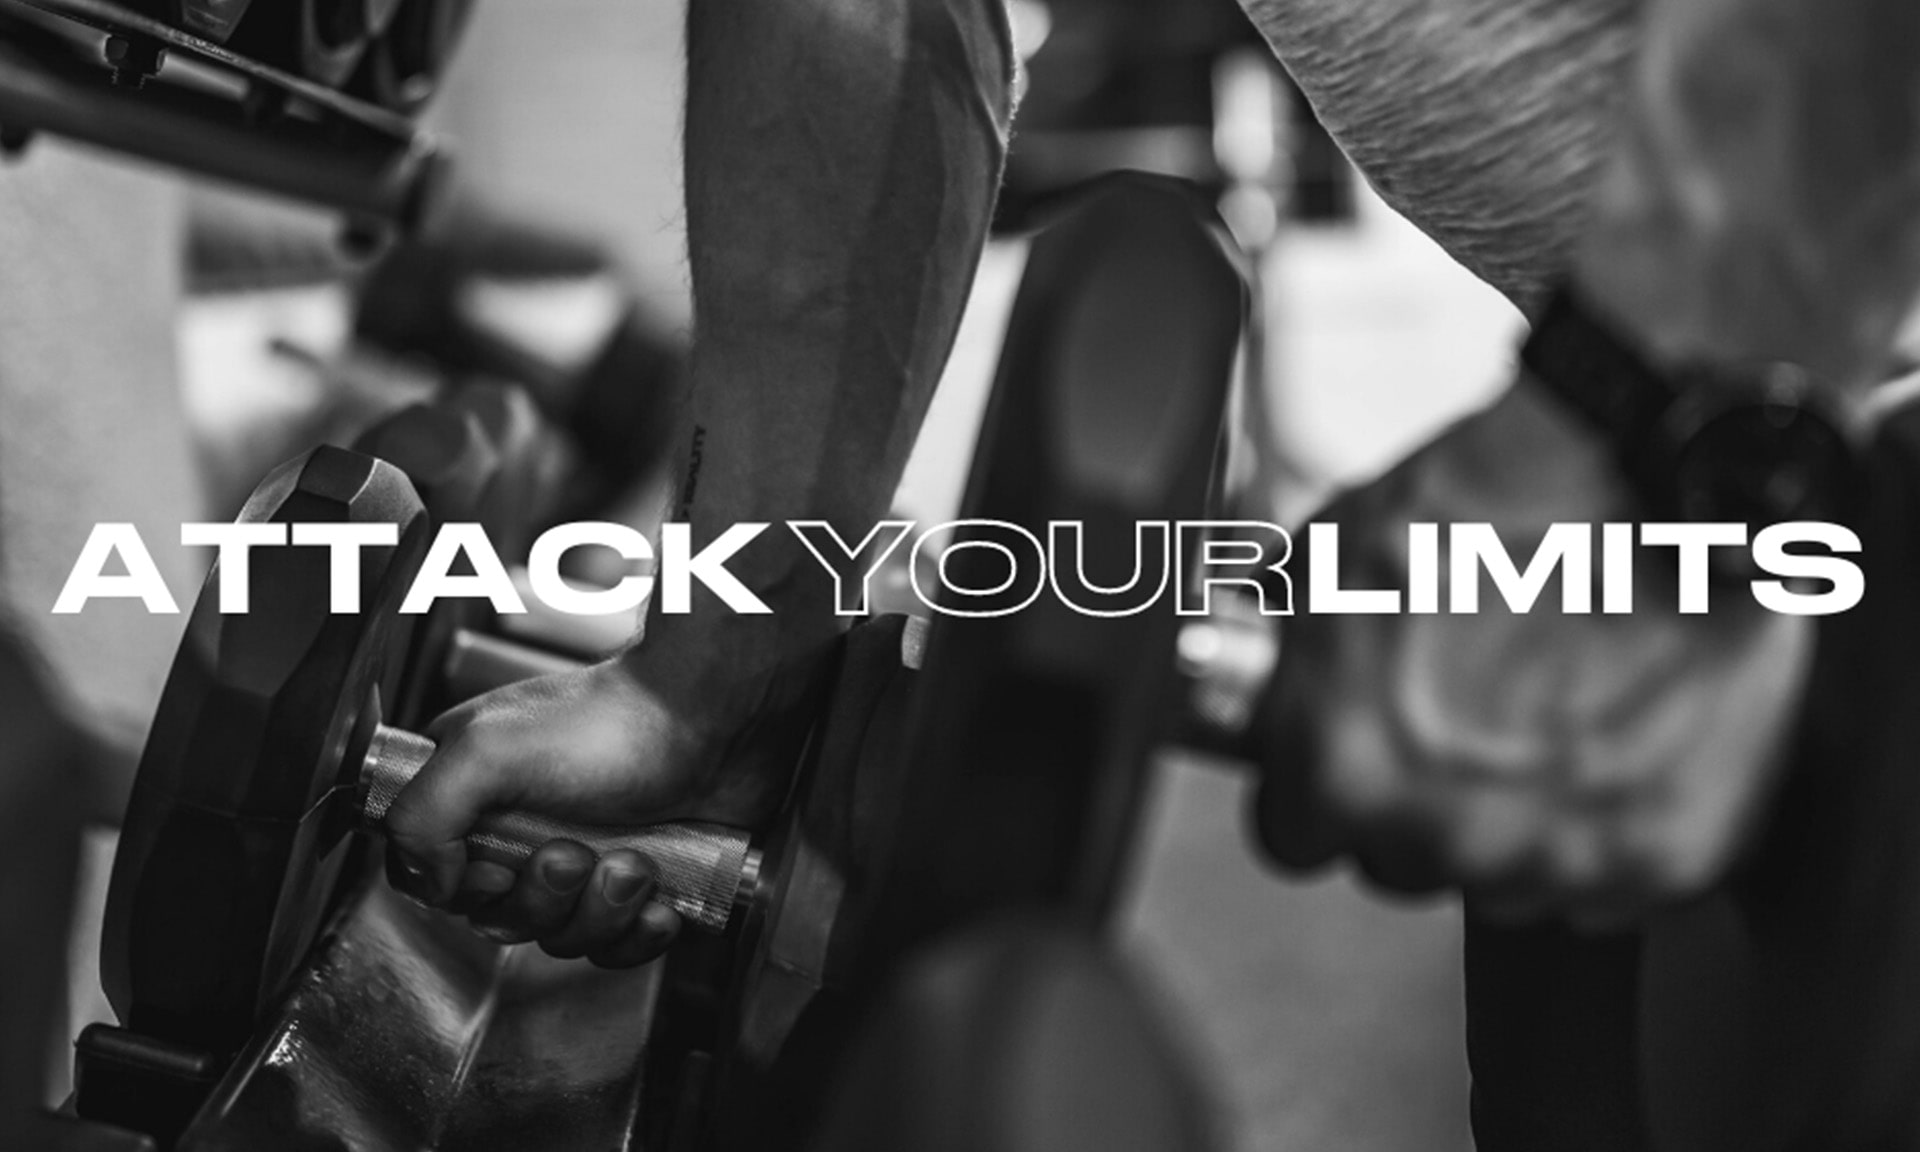 Attack your limits